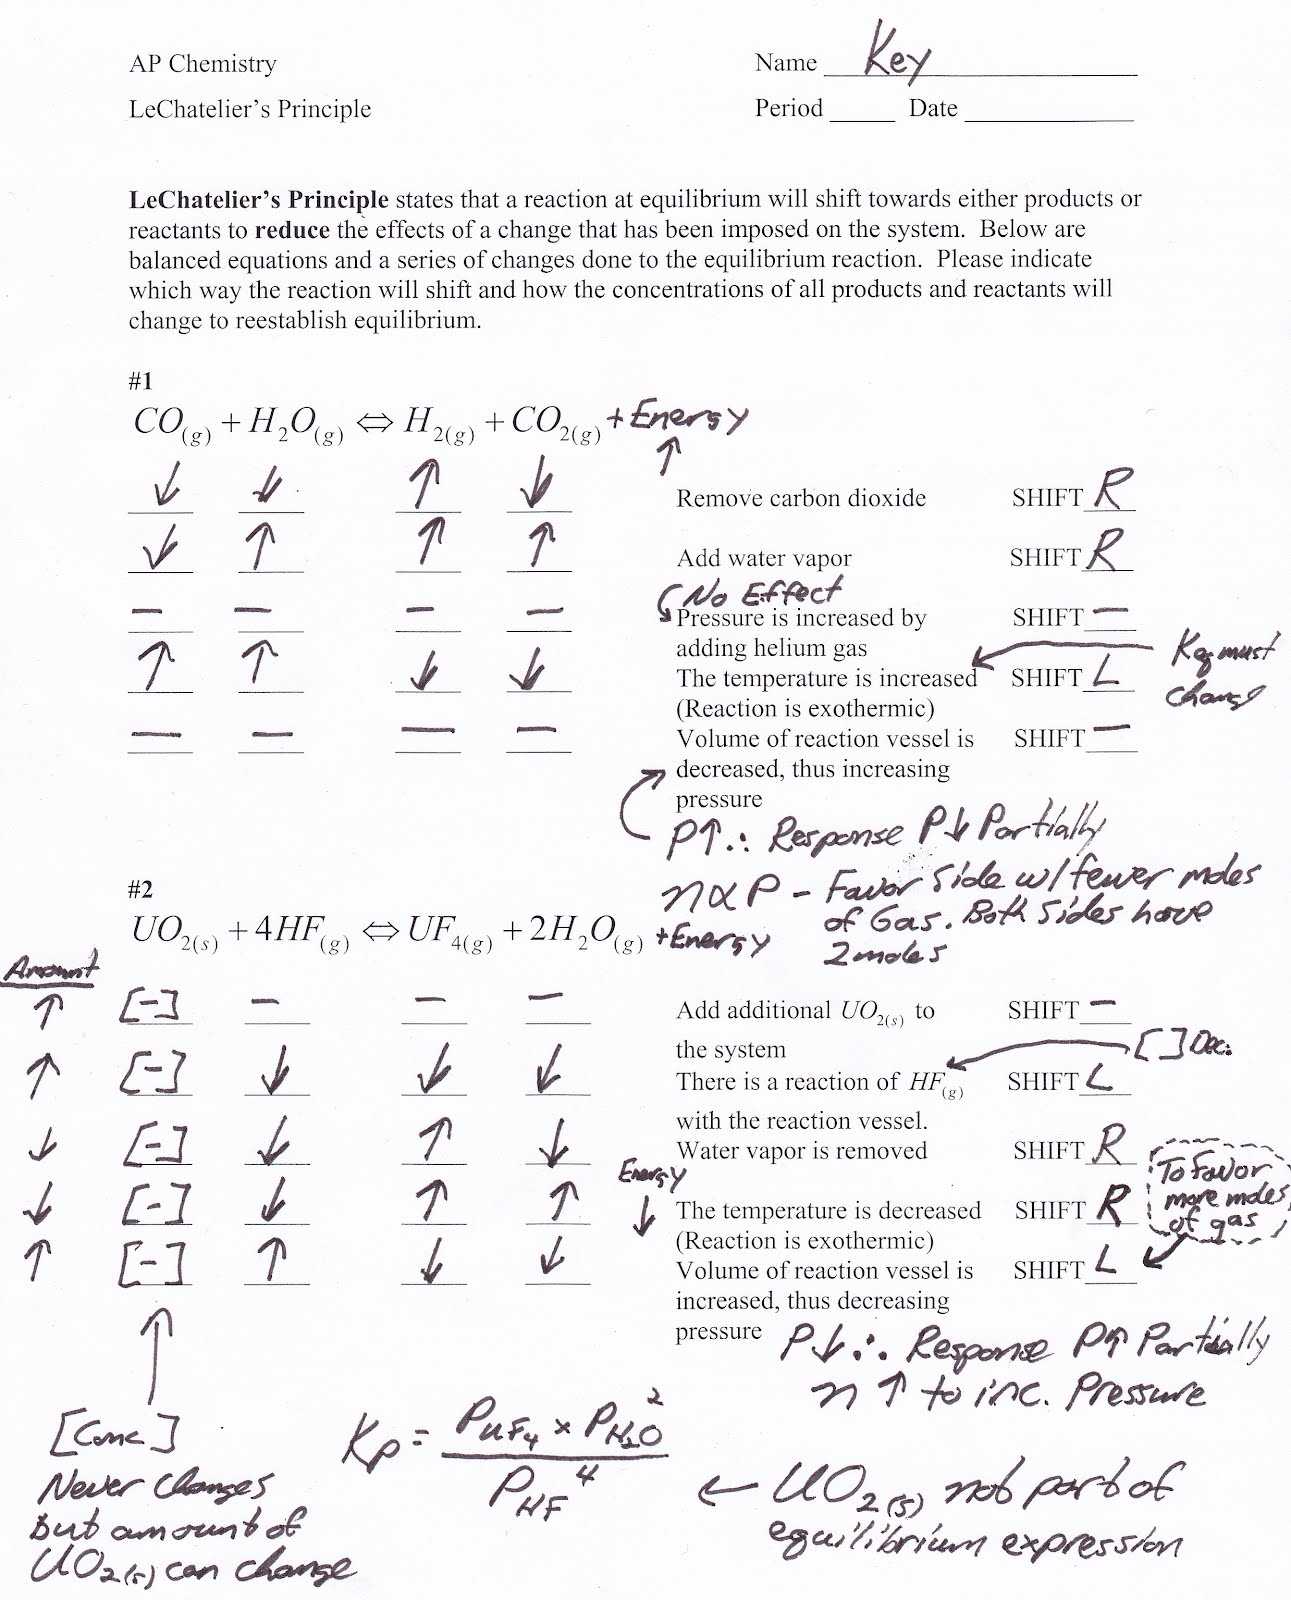 Nuclear Chemistry Worksheet Answer Key together with Heritage High School Mr Brueckner S Ap Chemistry Class 2011 12